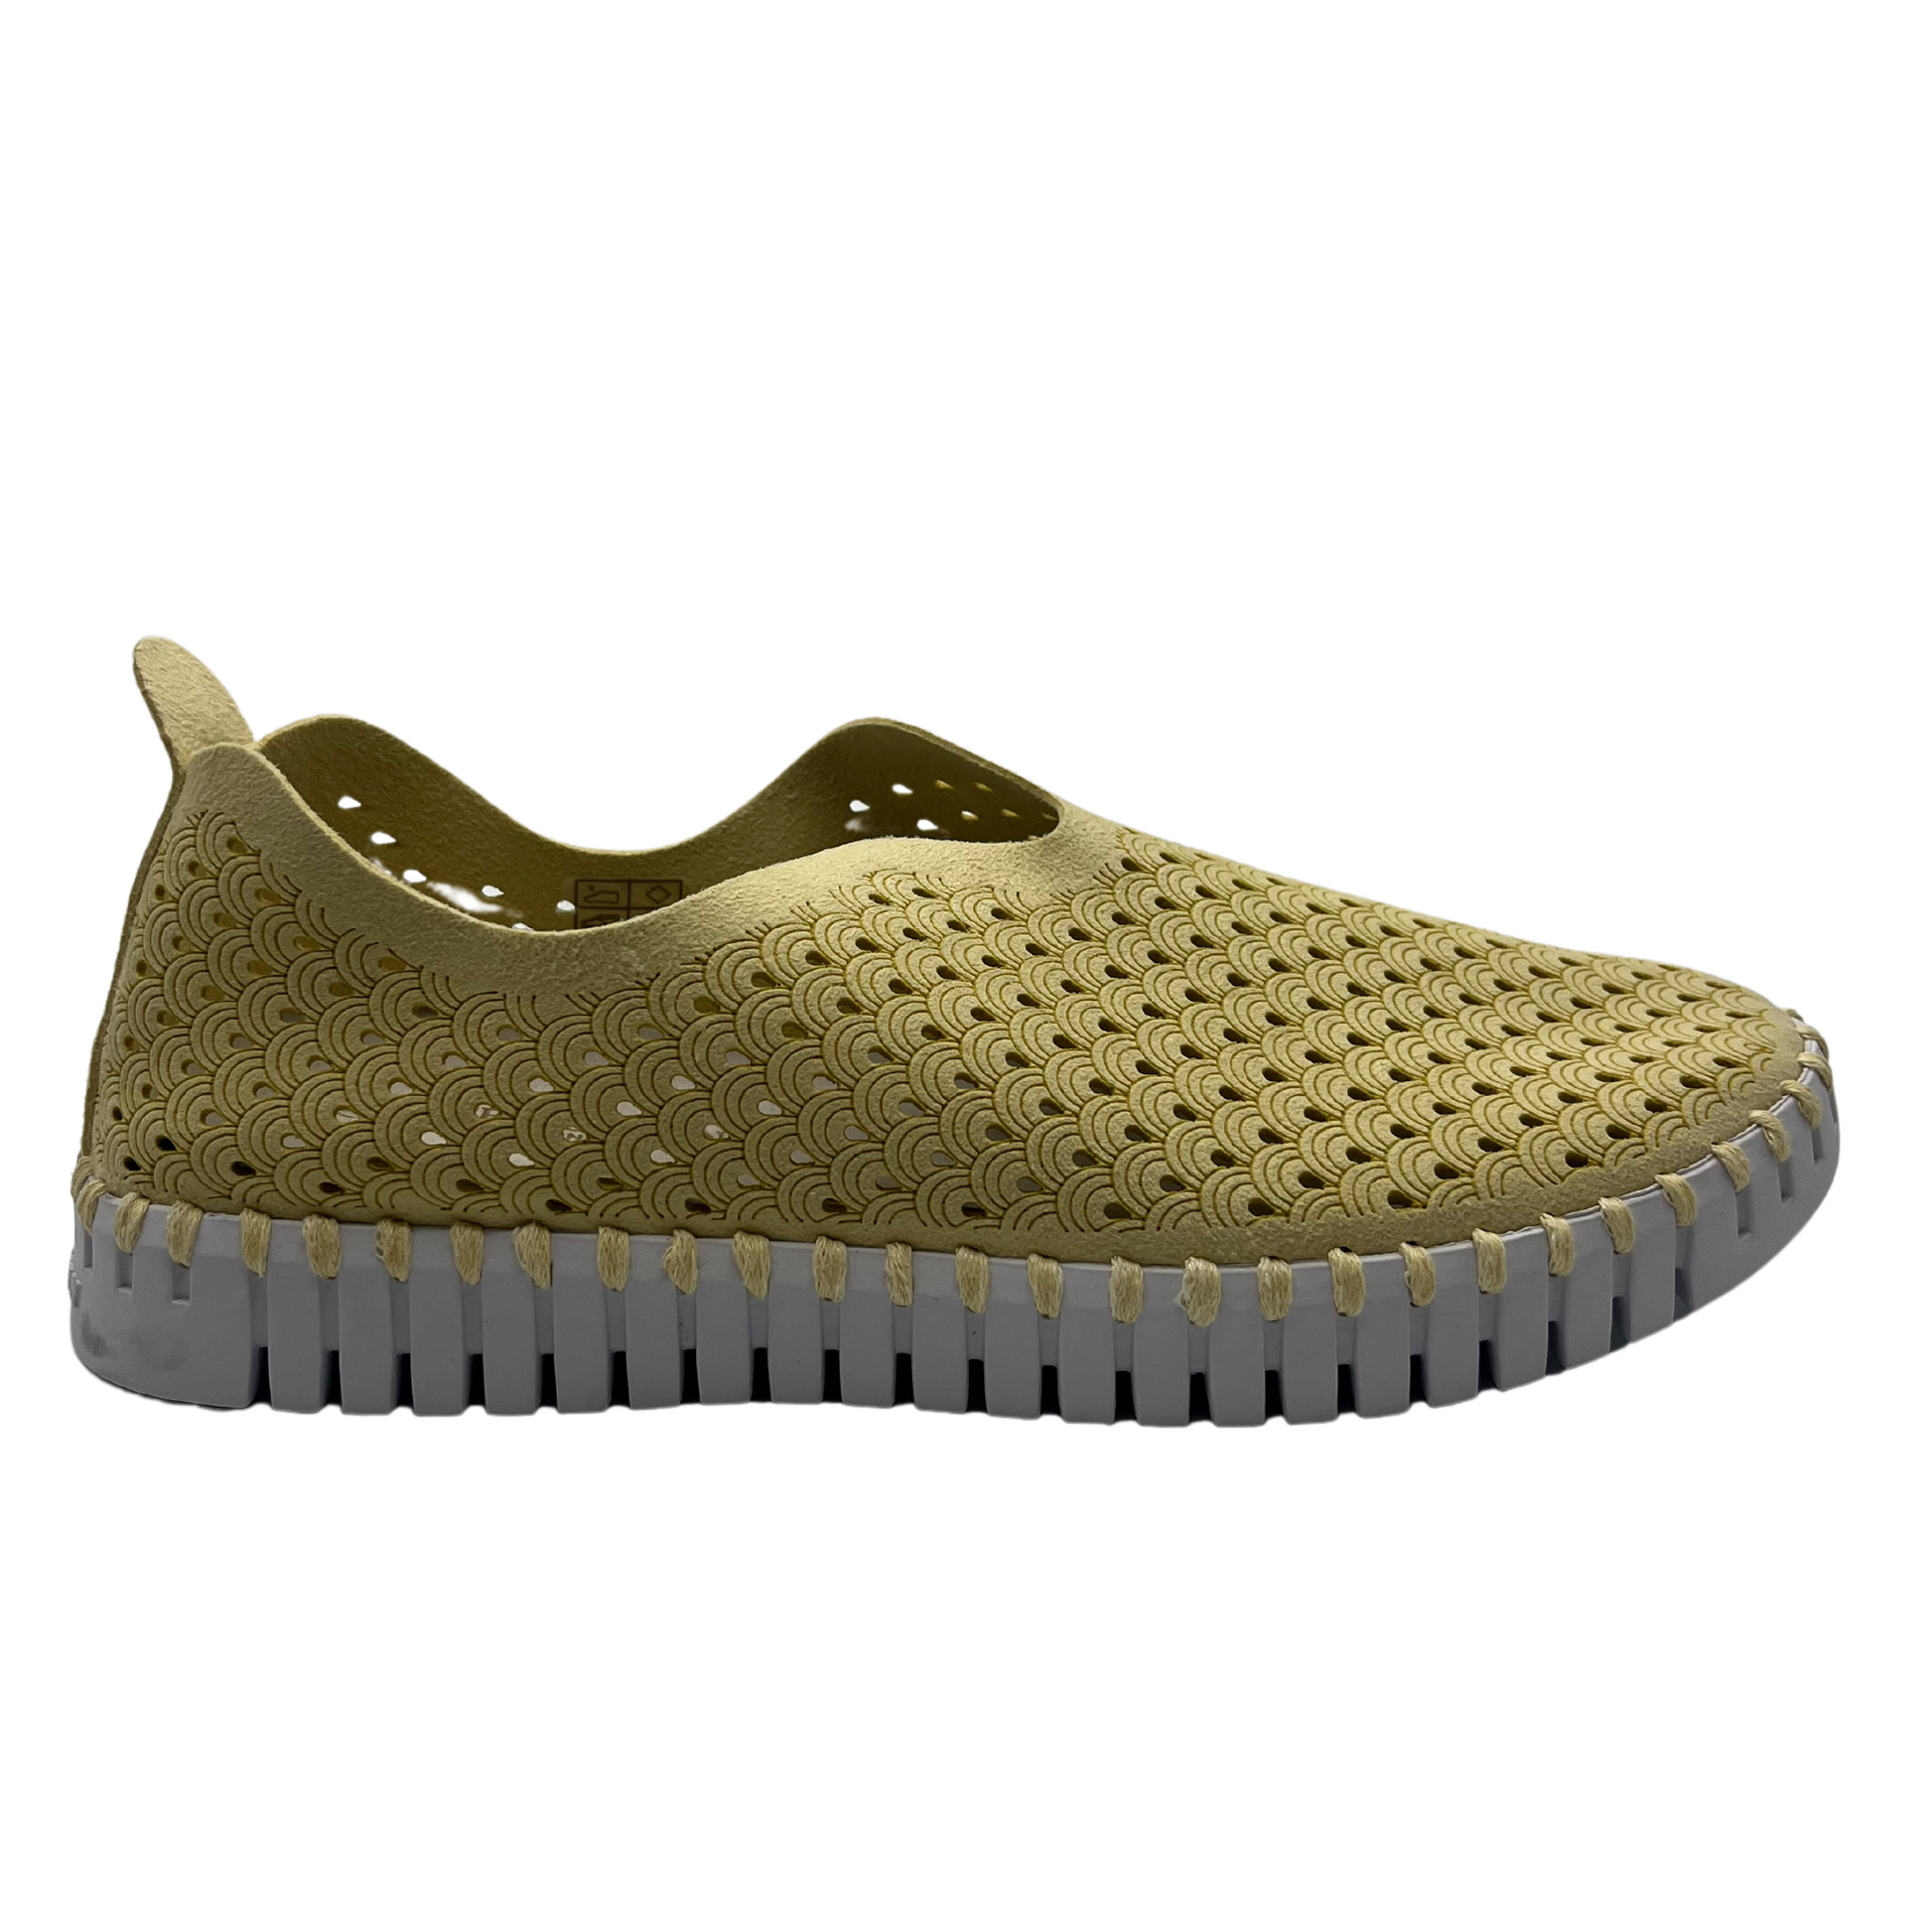 Right facing view of cream coloured slip on shoe with mesh design and white rubber outsole